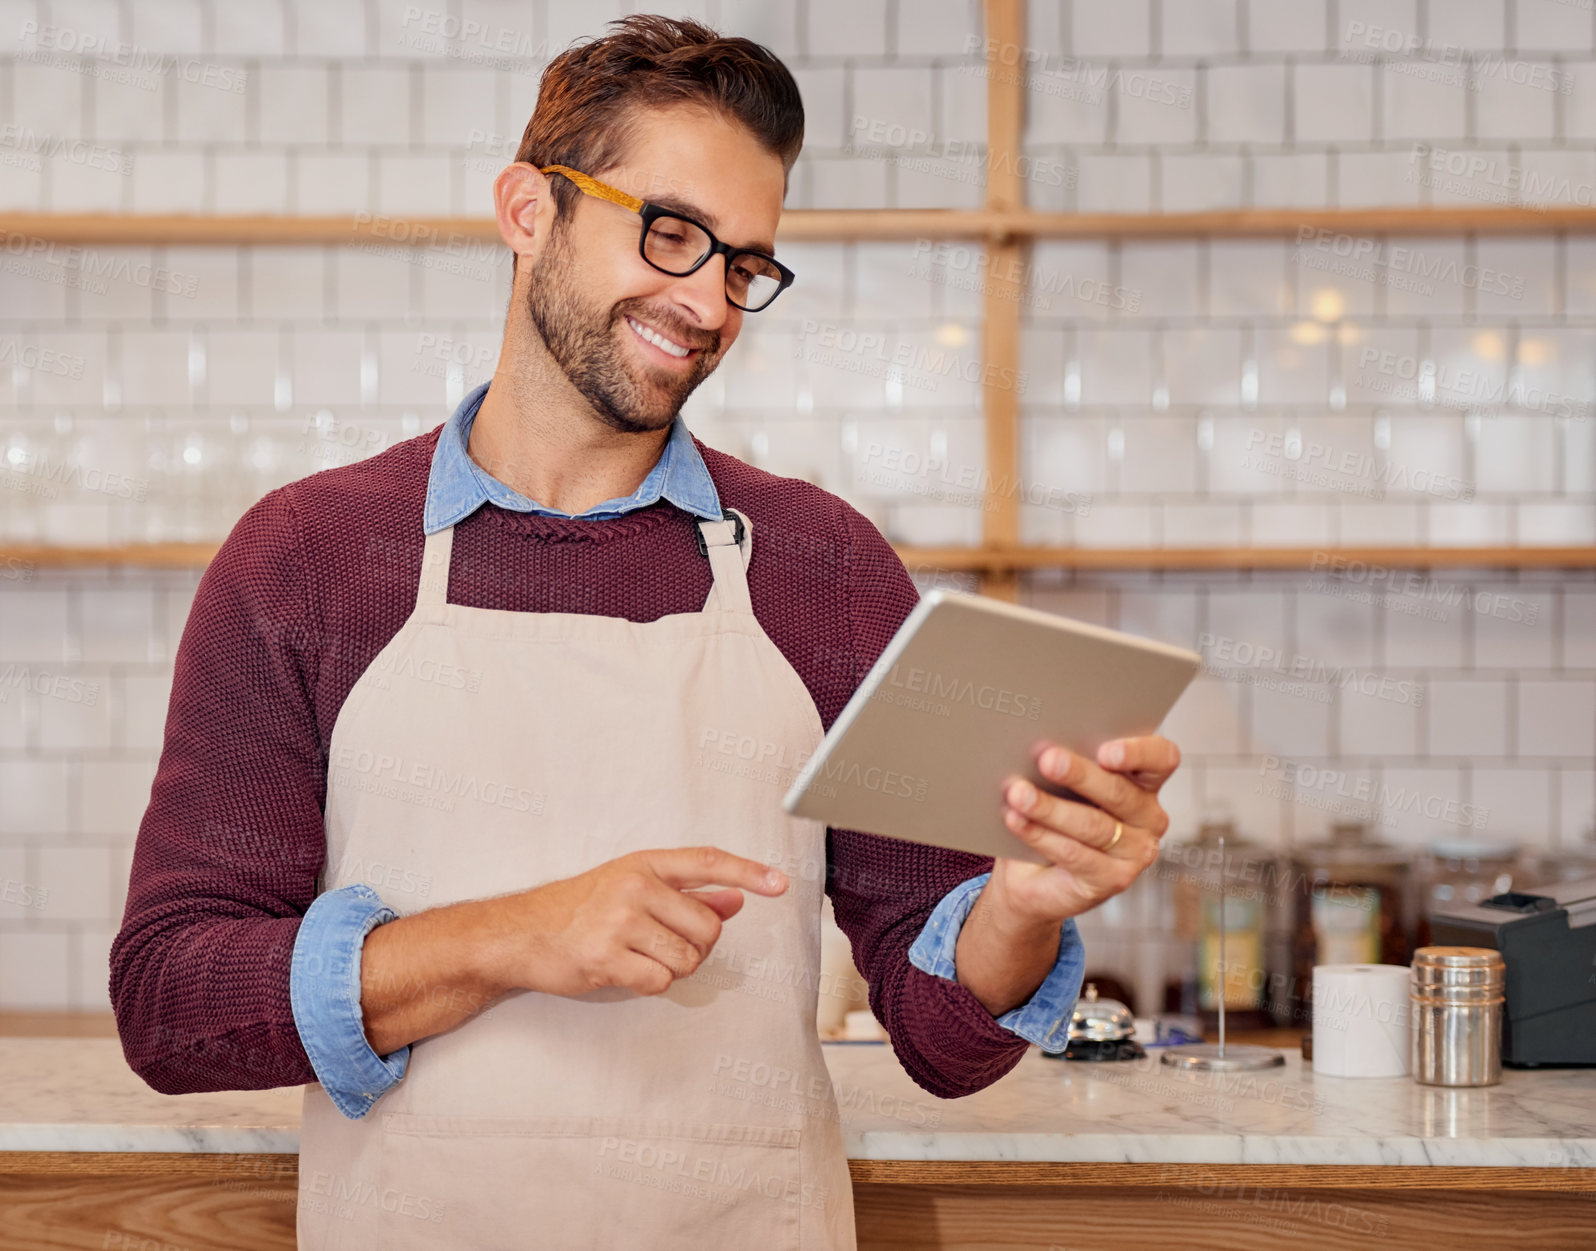 Buy stock photo Shot of happy young business owner using a tablet while standing in his coffee shop